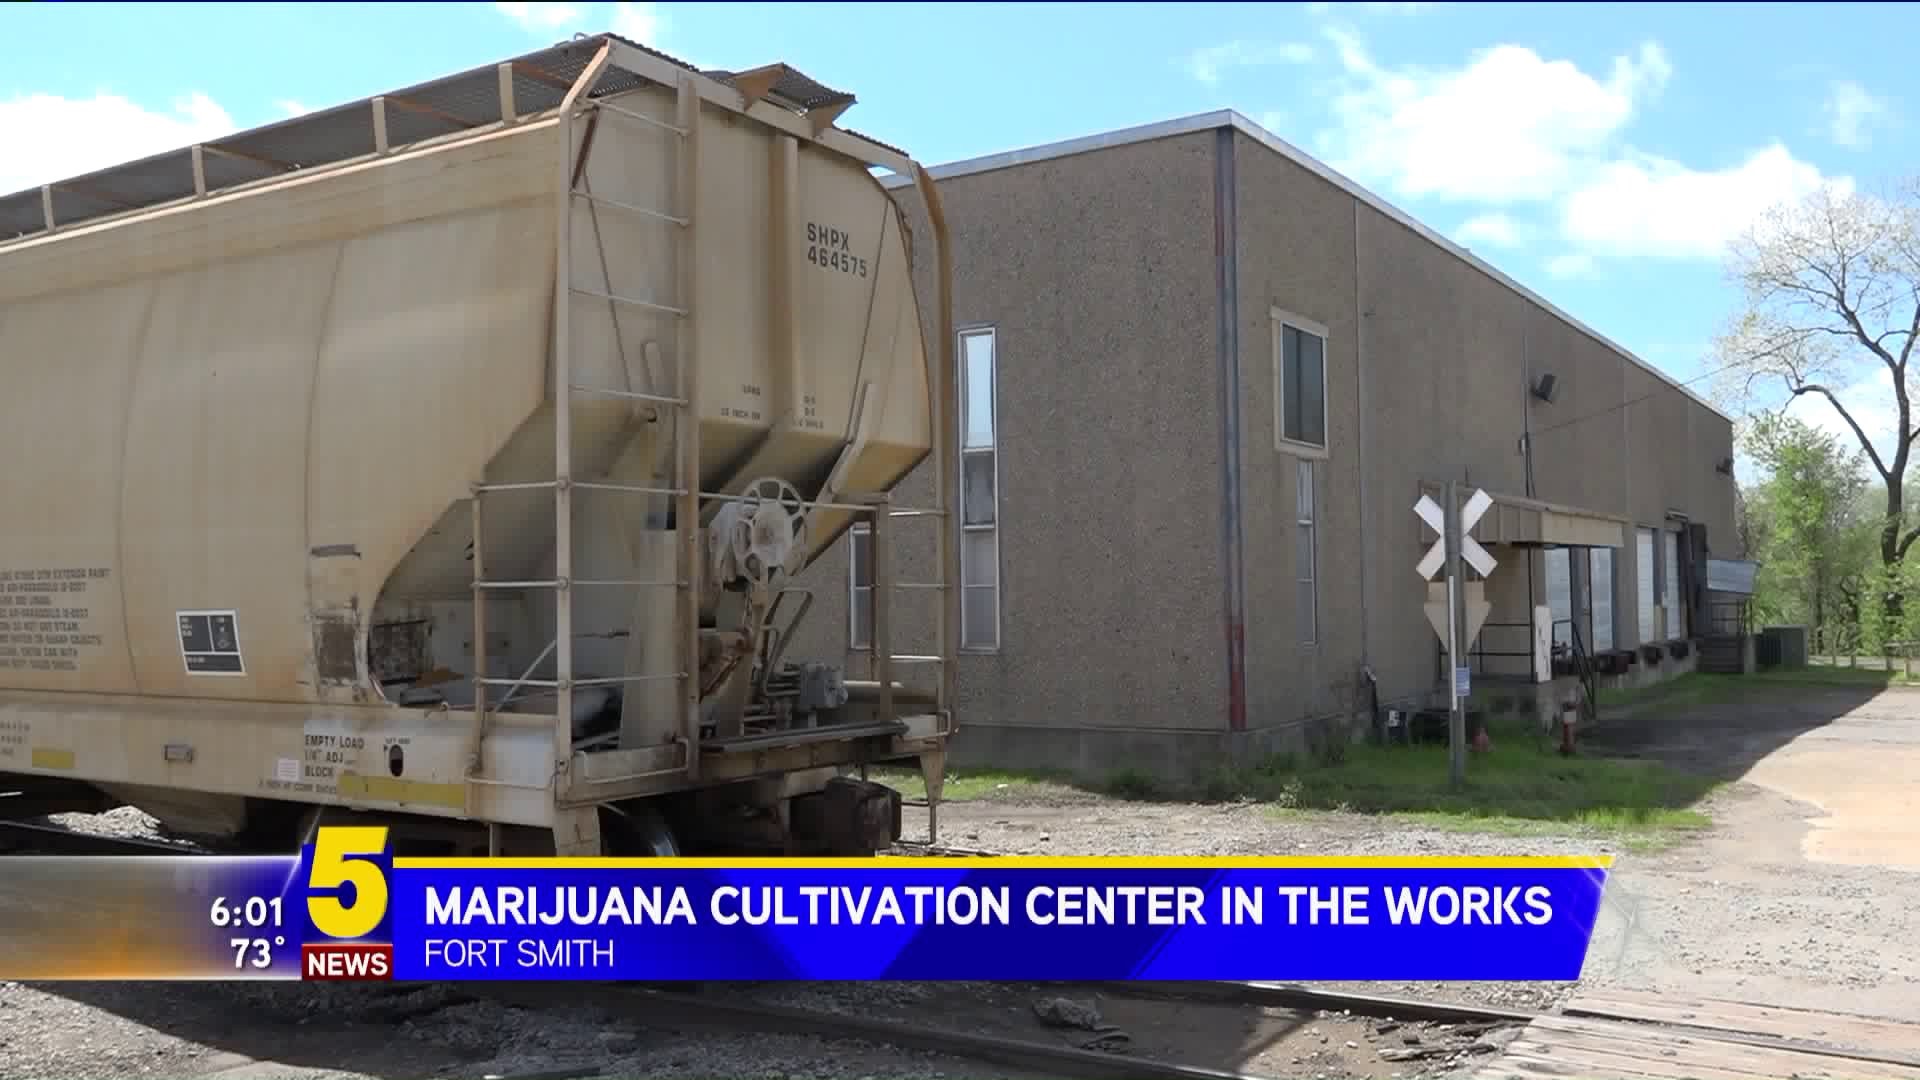 Brothers Plan To Open Medical Marijuana Facility In Fort Smith